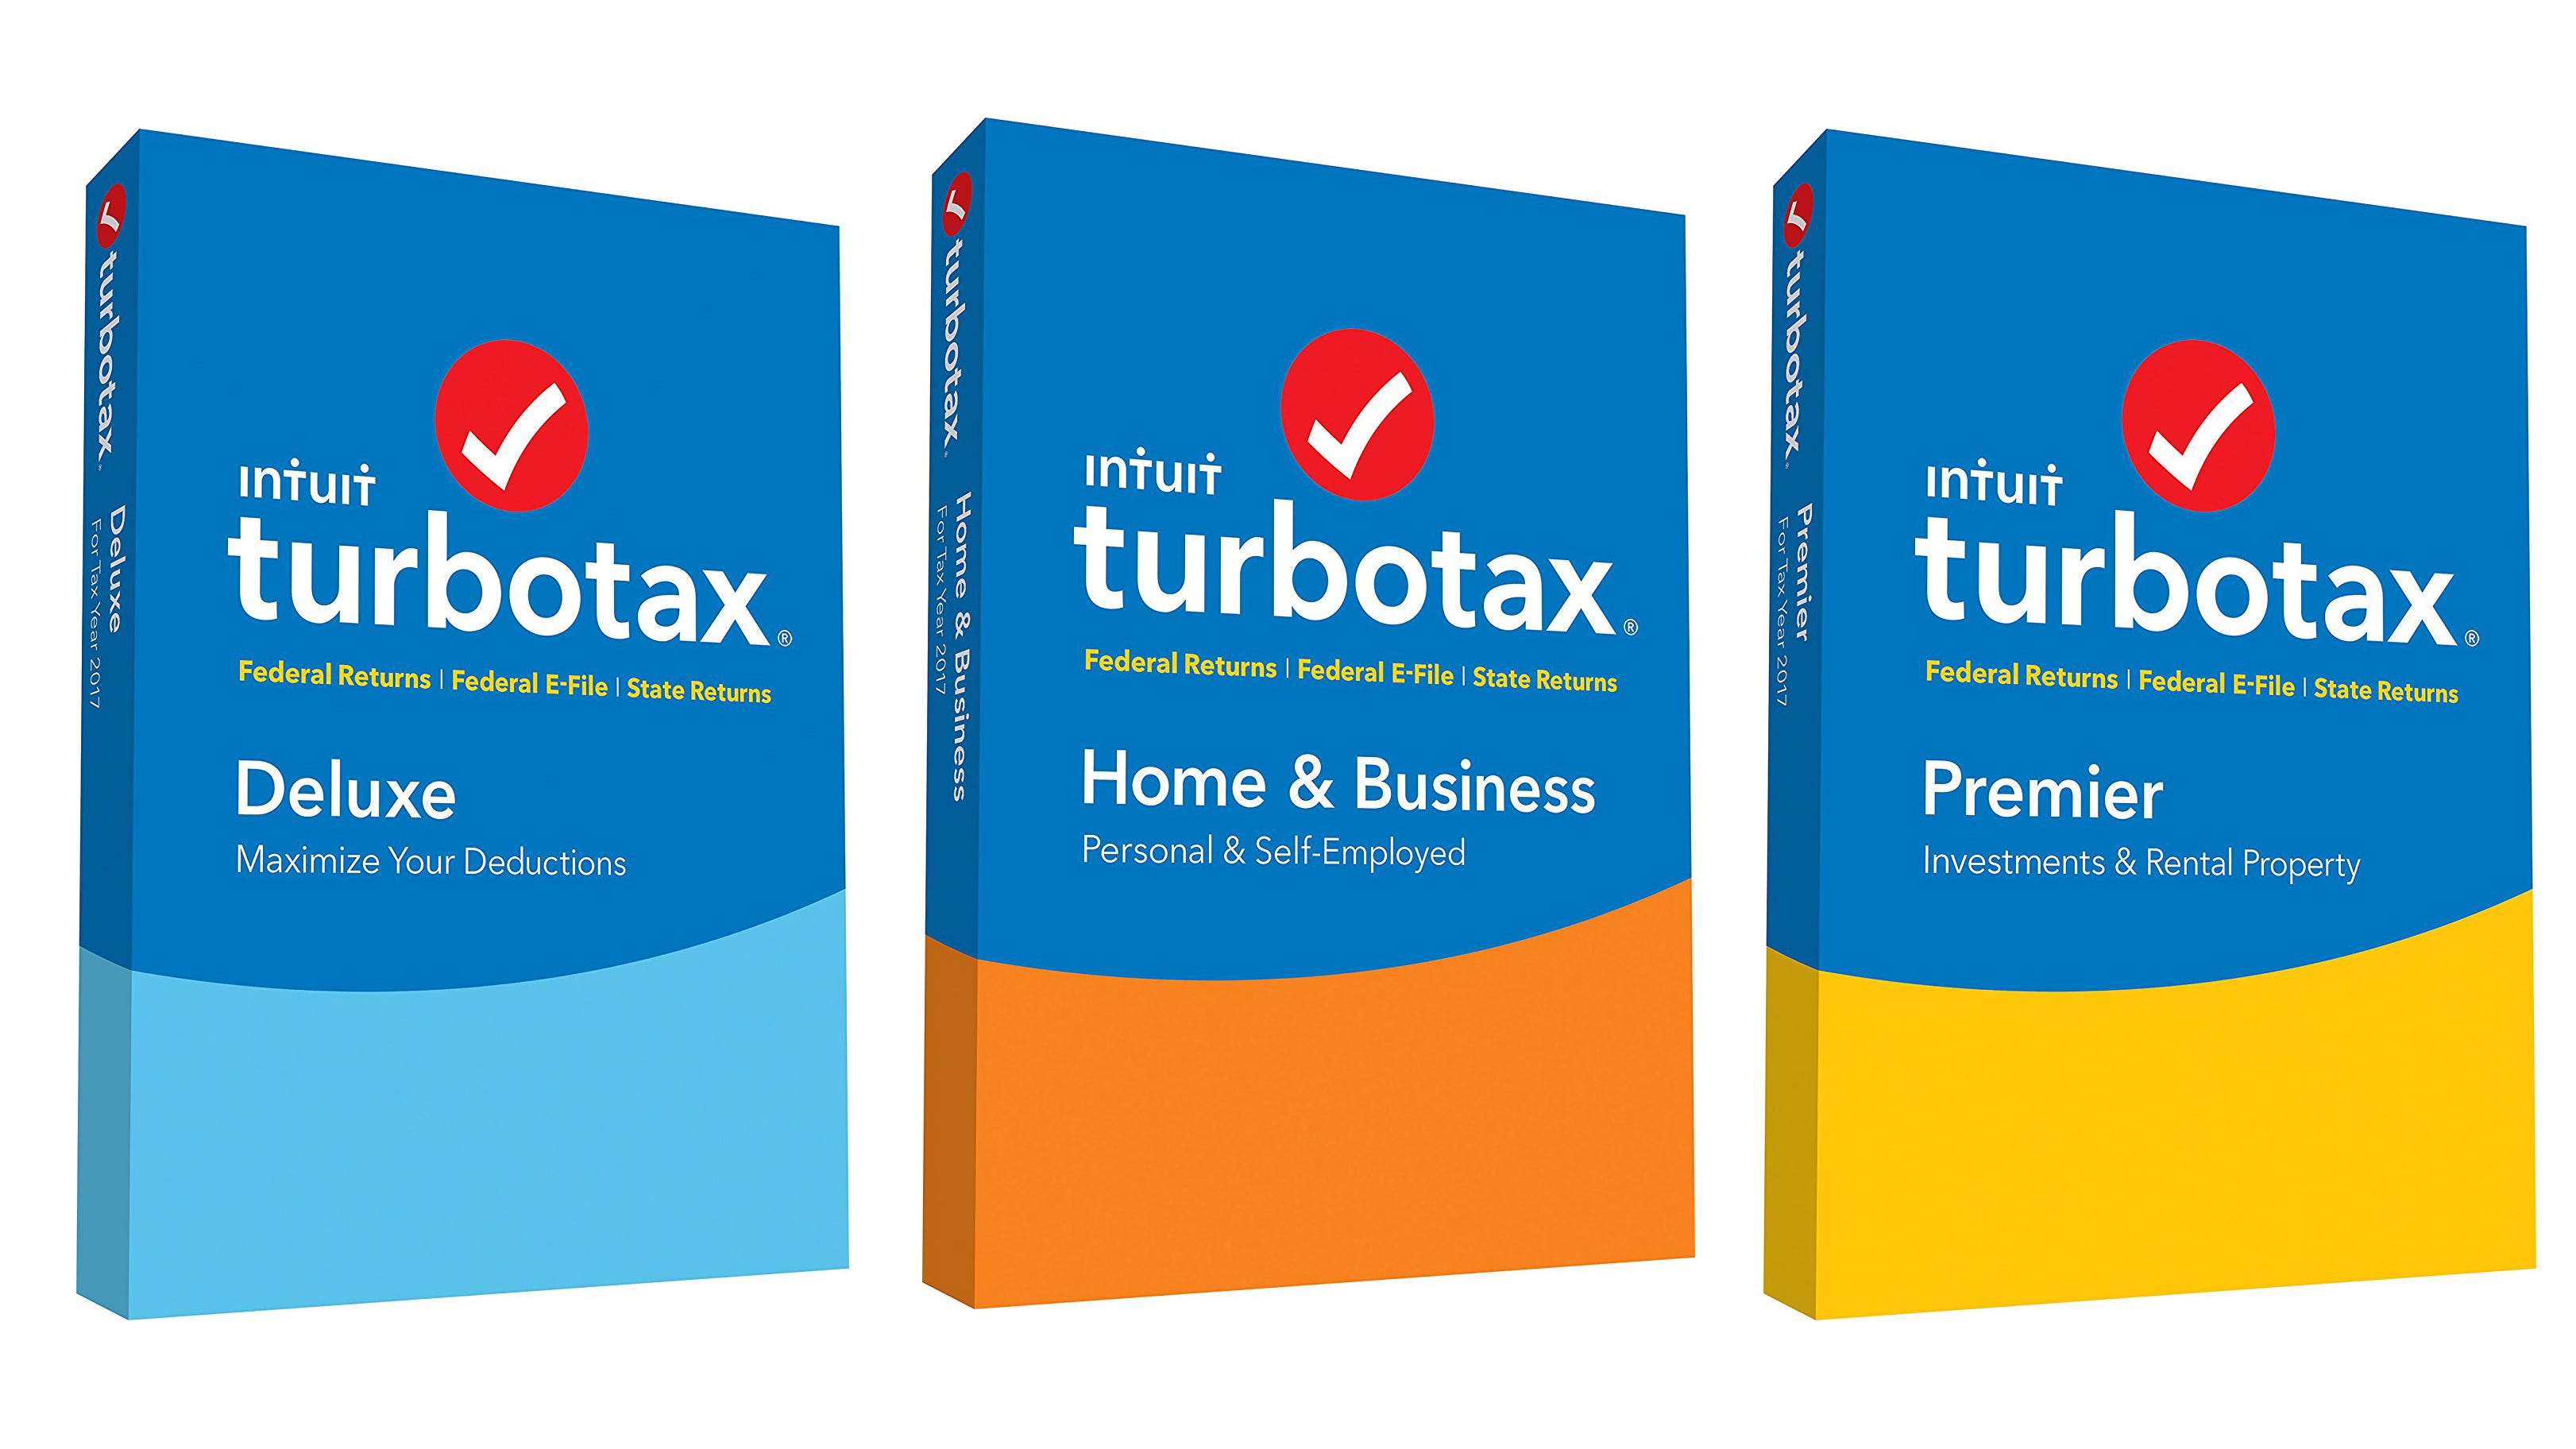 turbotax home and business 2017 for mac download